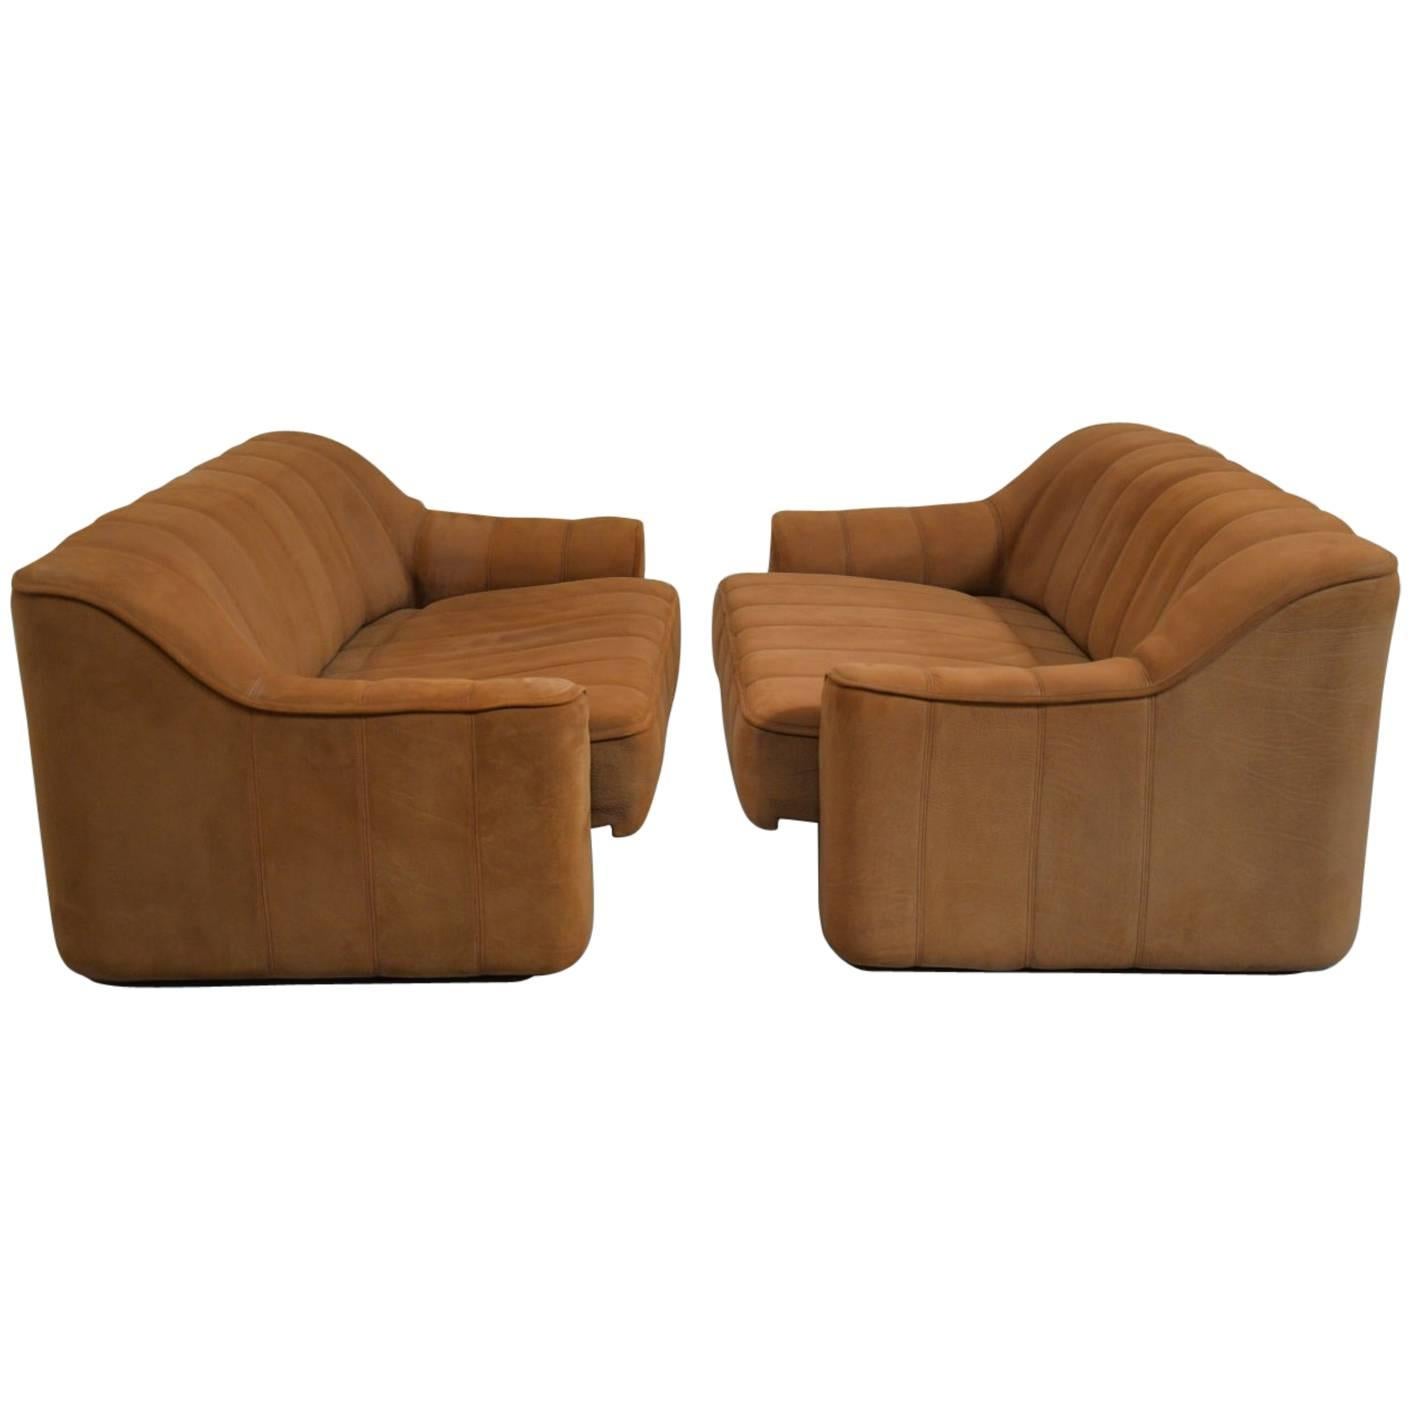 Discounted airfreight for our US and International customers ( from 2 weeks door to door)

We are delighted to bring to you a pair of vintage 1970s De Sede DS 44 two-seater sofas or loveseats in thick buffalo leather with a soft silky texture